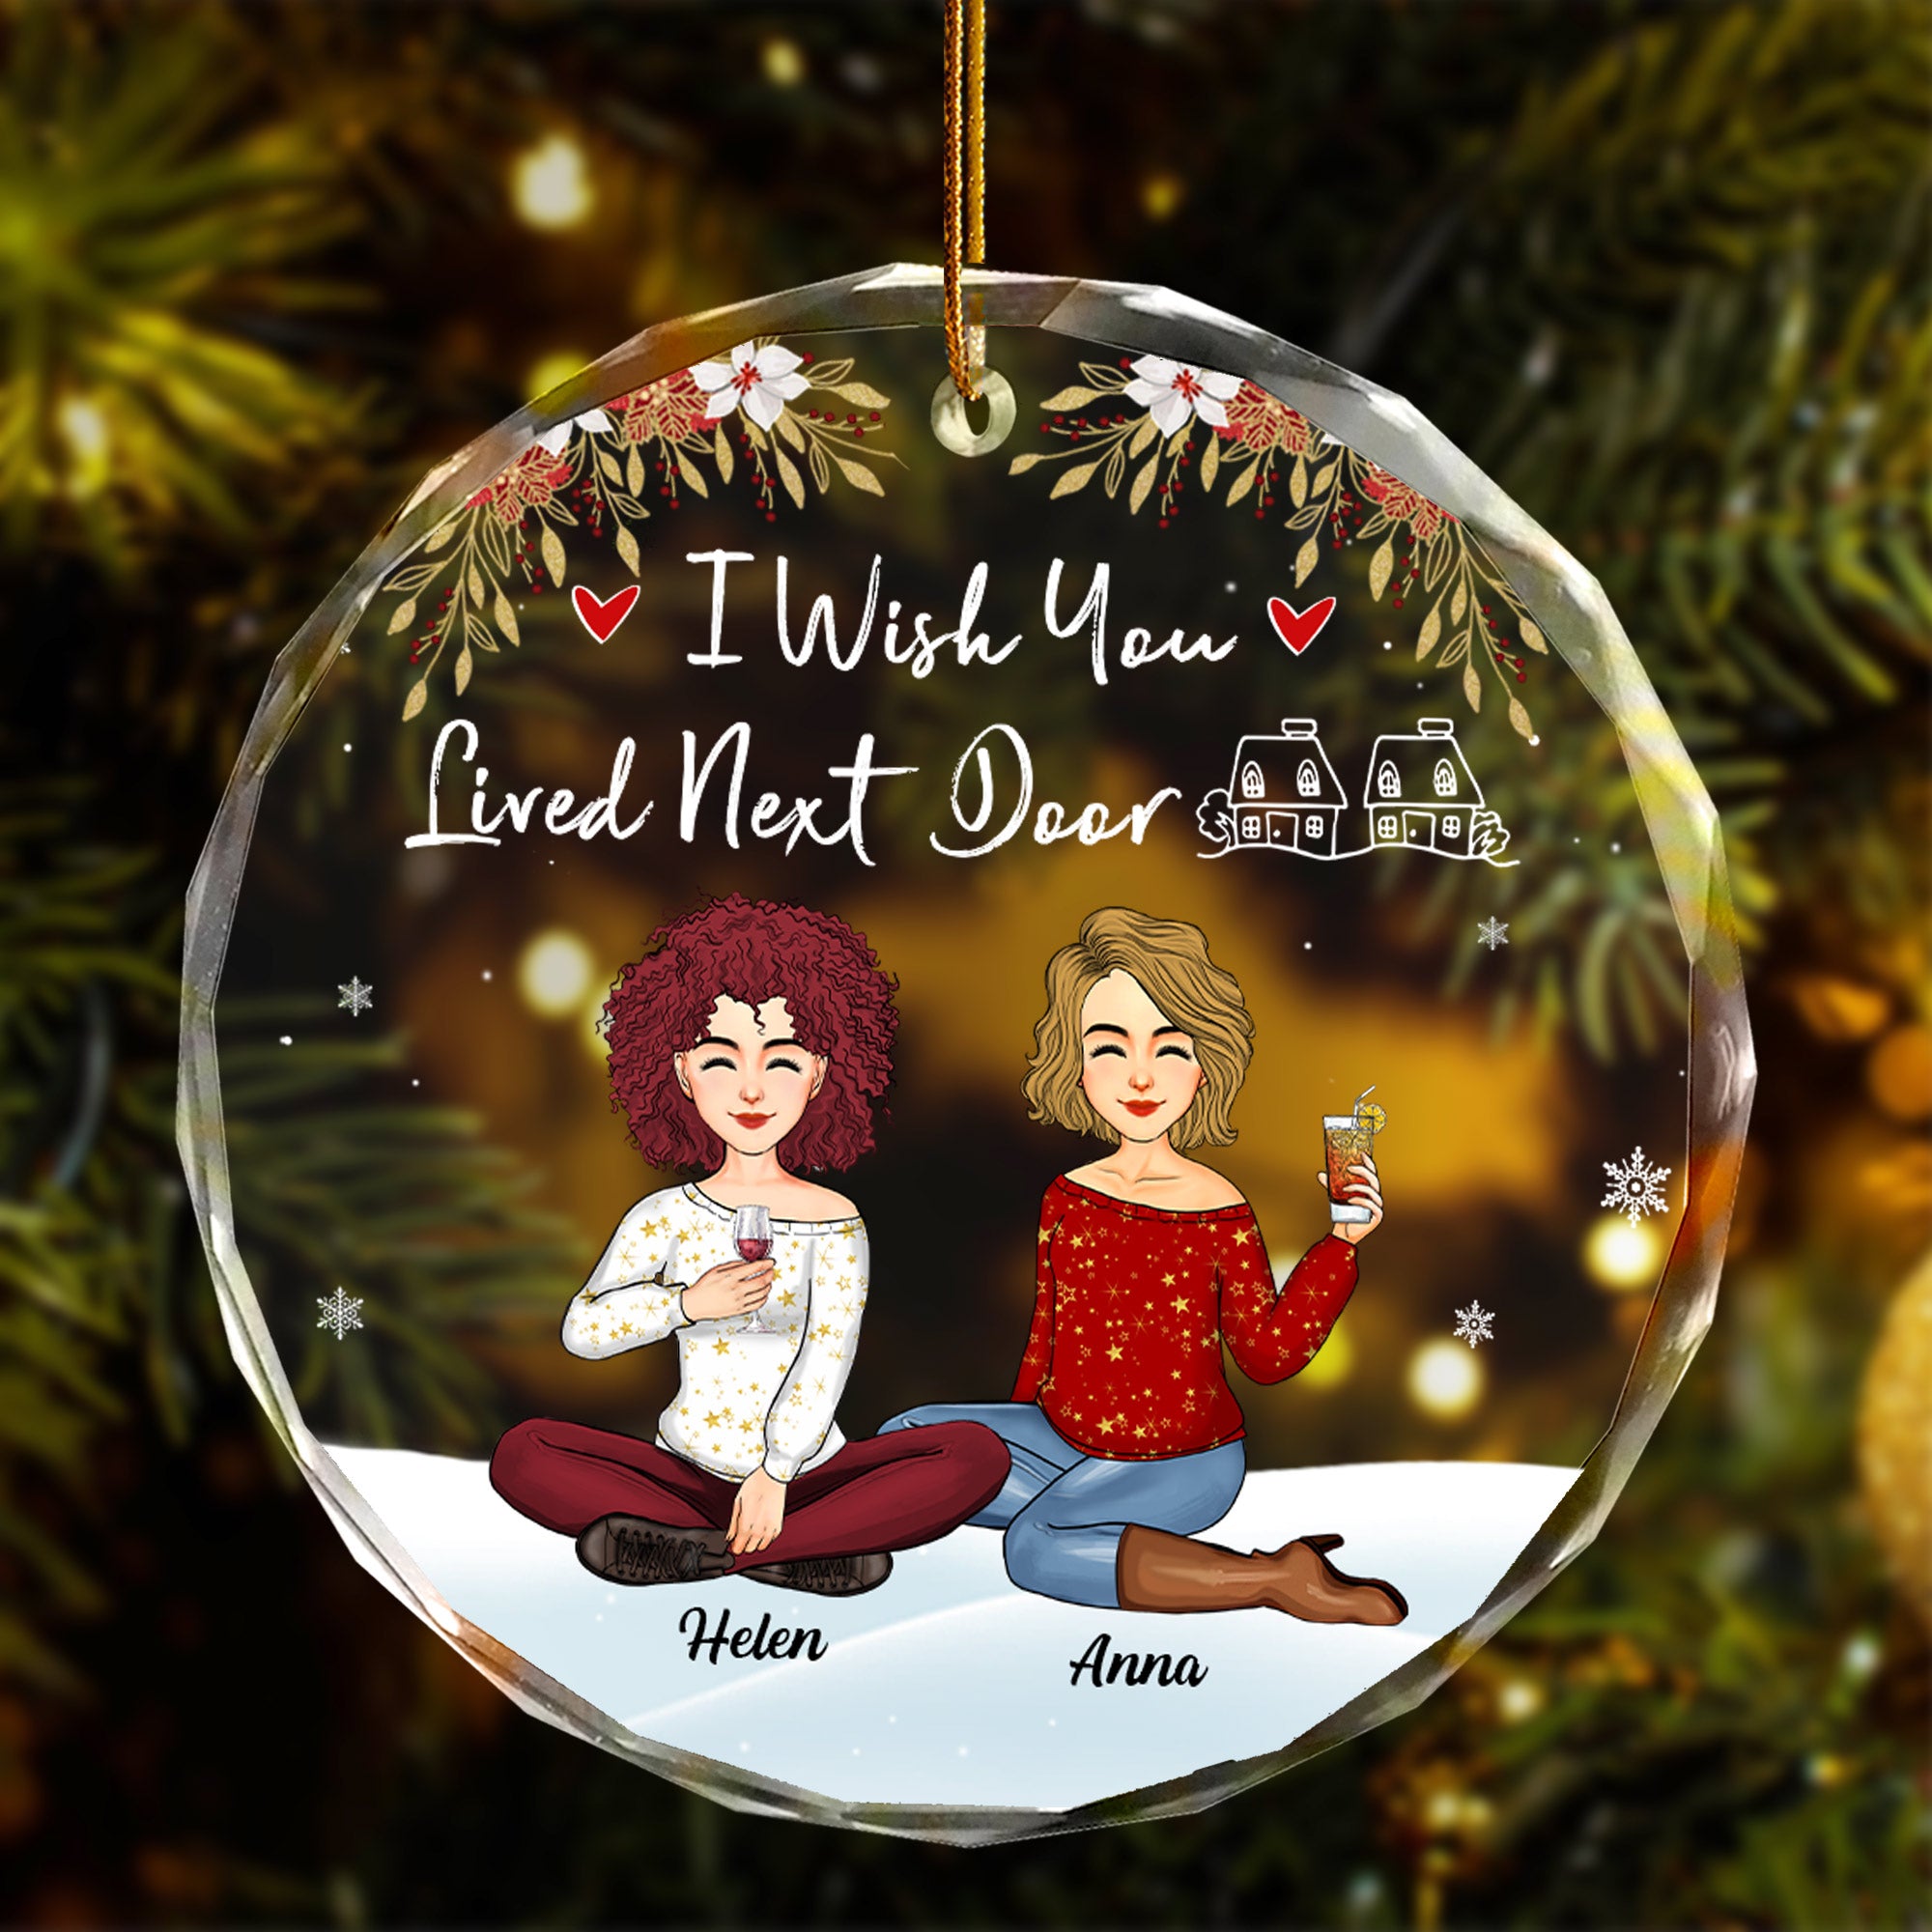 Luxury Ornament I Wish You Lived Next Door - Personalized Glass Ornament Gift For Besties, Best Friends